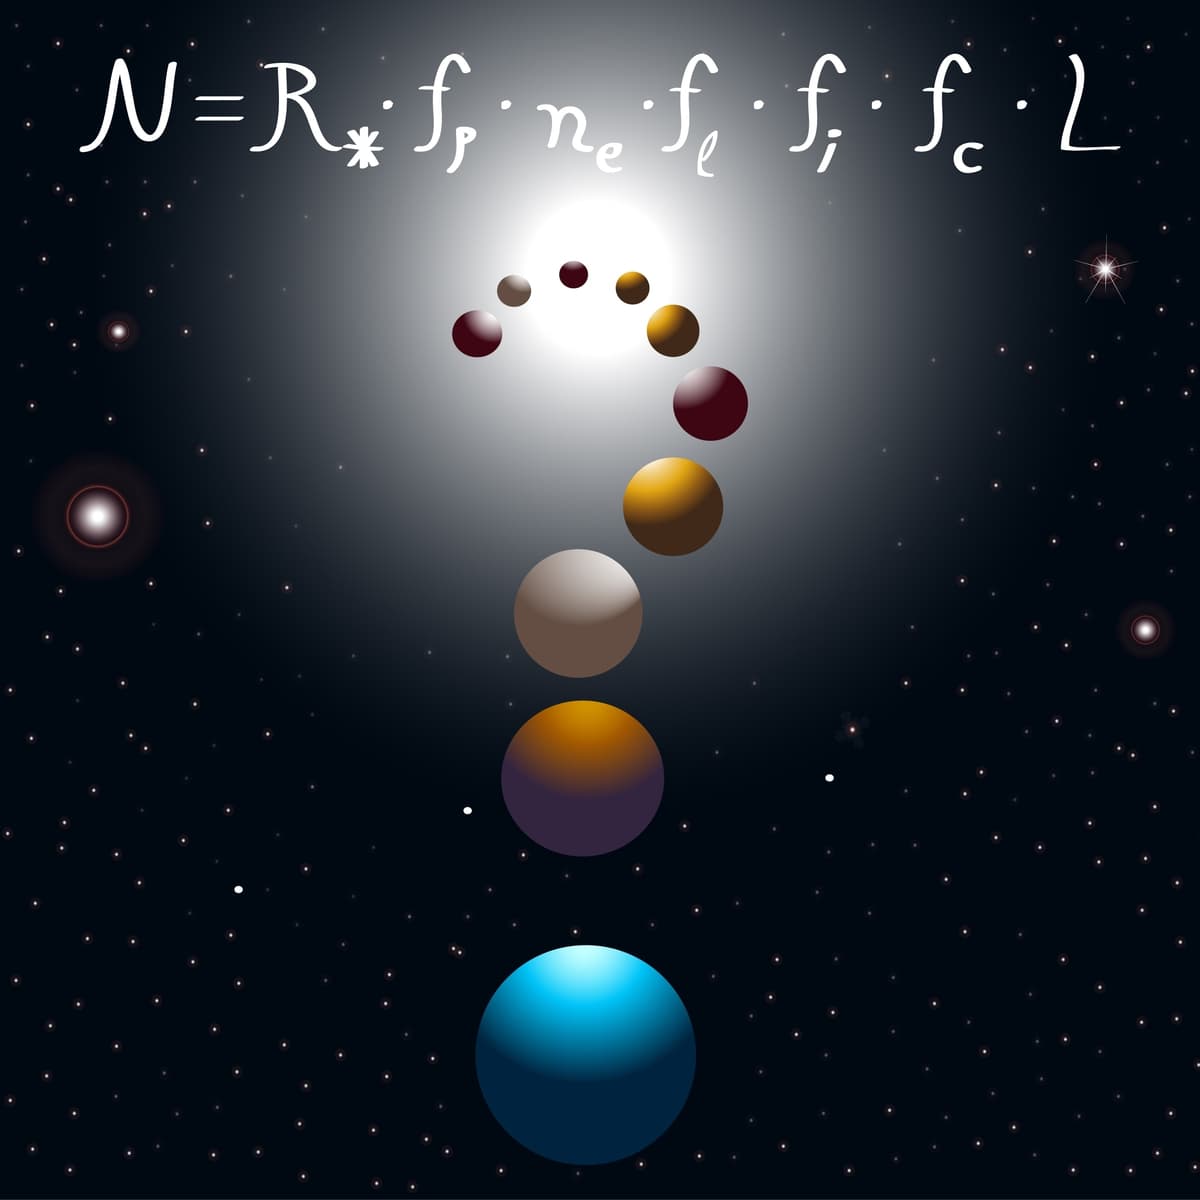 The Drake Equation and planets aligned in a question mark